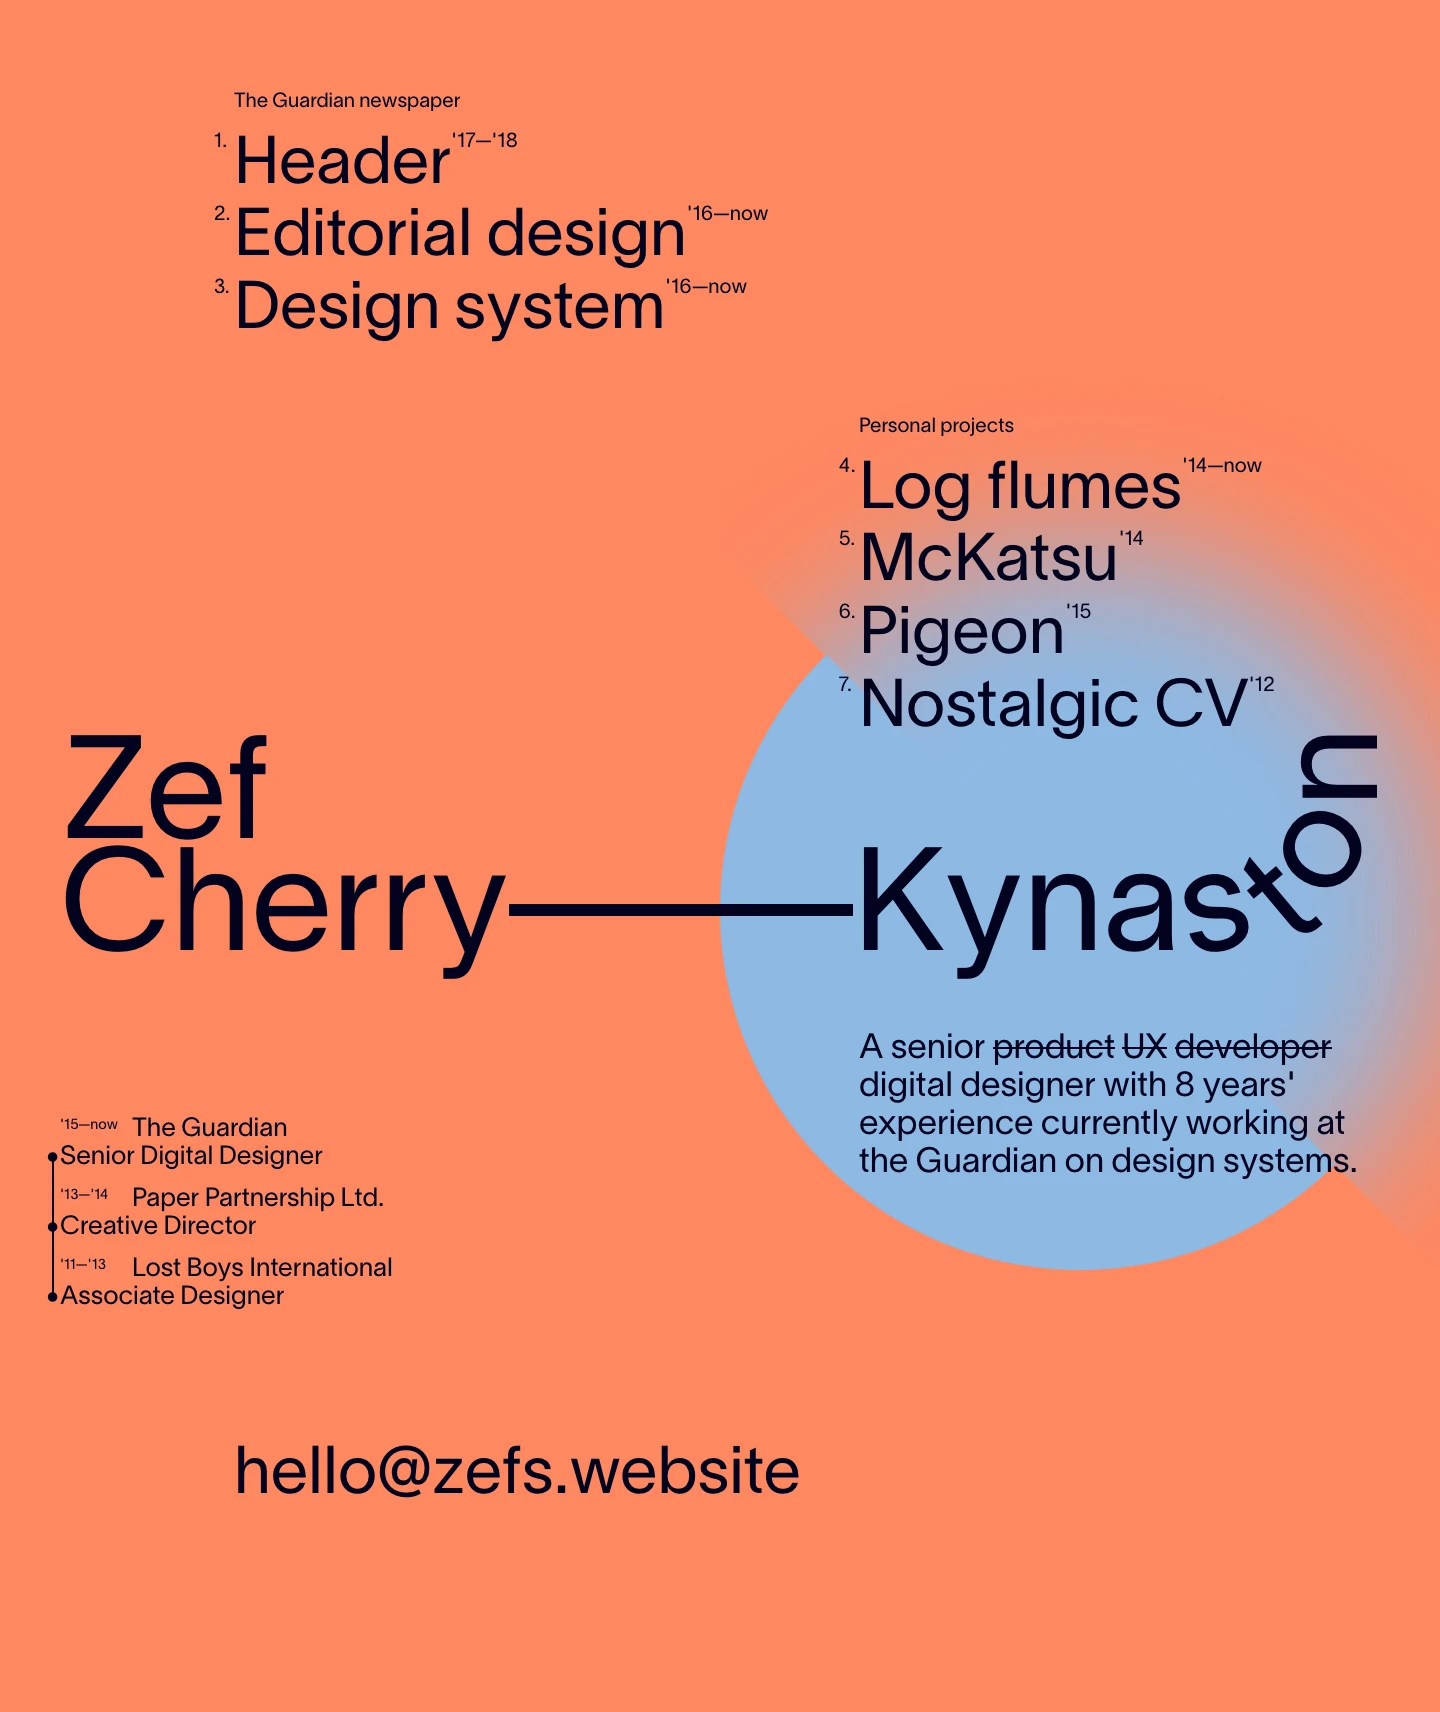 Zef Cherry Kynaston Landing Page Example: A senior digital designer with 8 years' experience currently working at the Guardian on design systems.